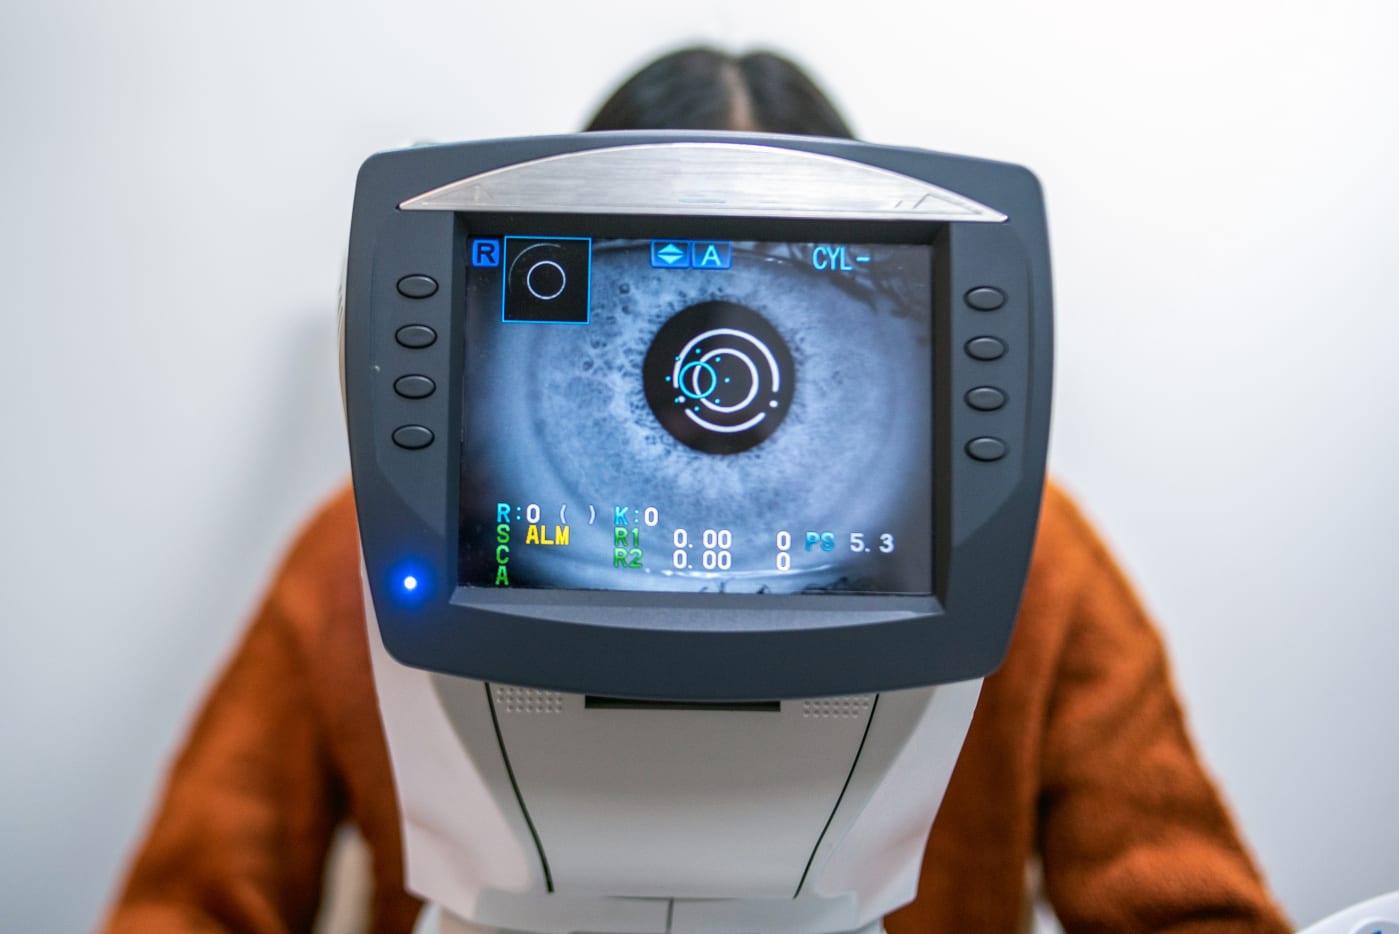 GPT-4 performed close to the level of expert doctors in eye assessments